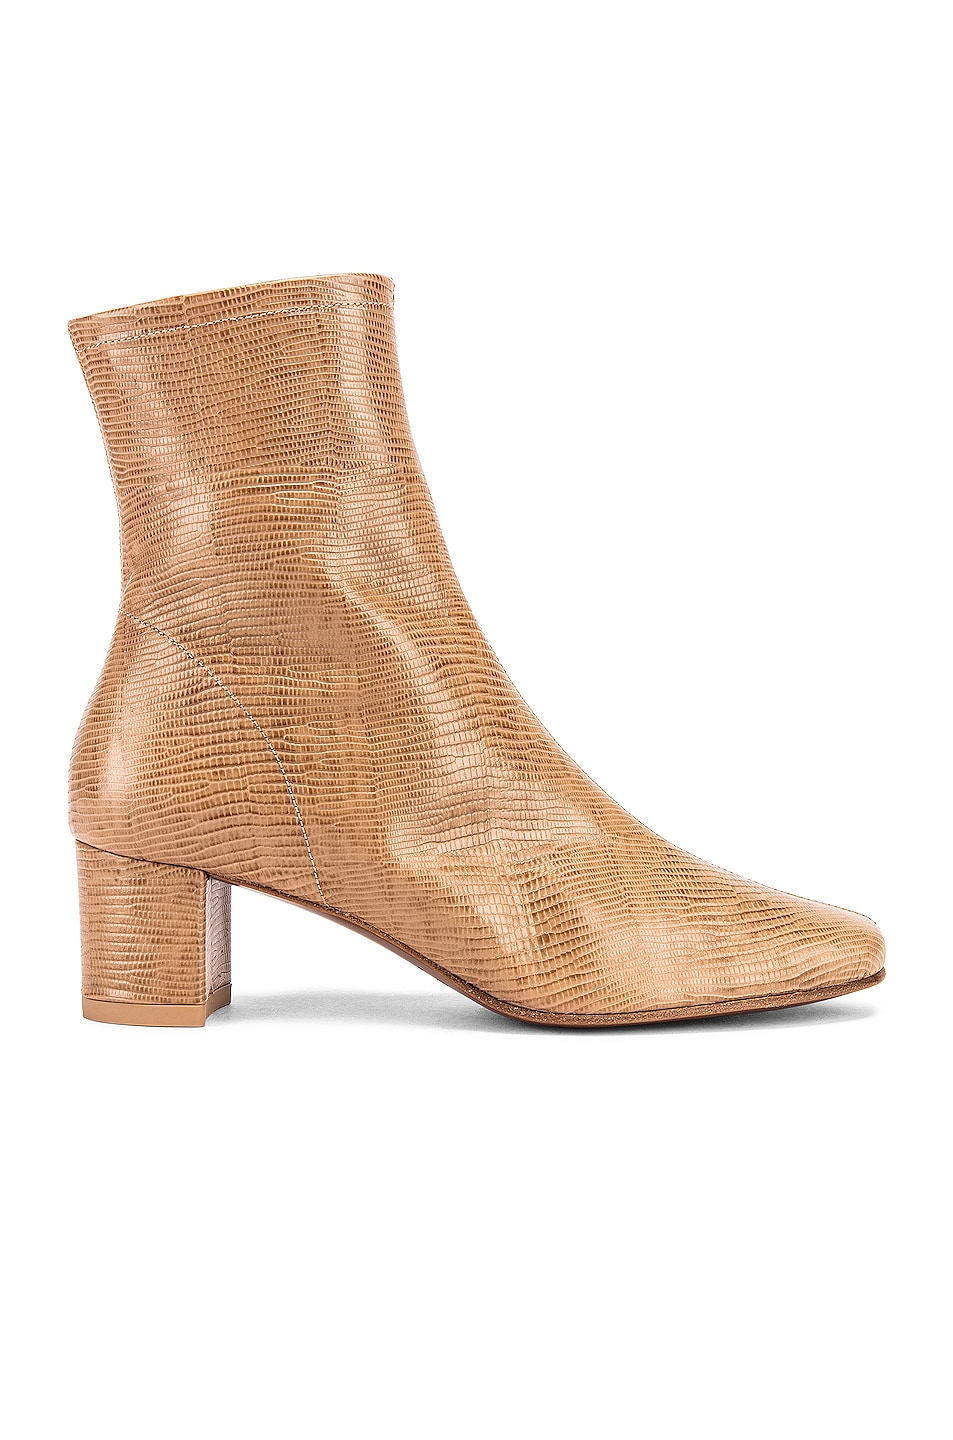 Image 1 of BY FAR Sofia Lizard Embossed Boot in Tan